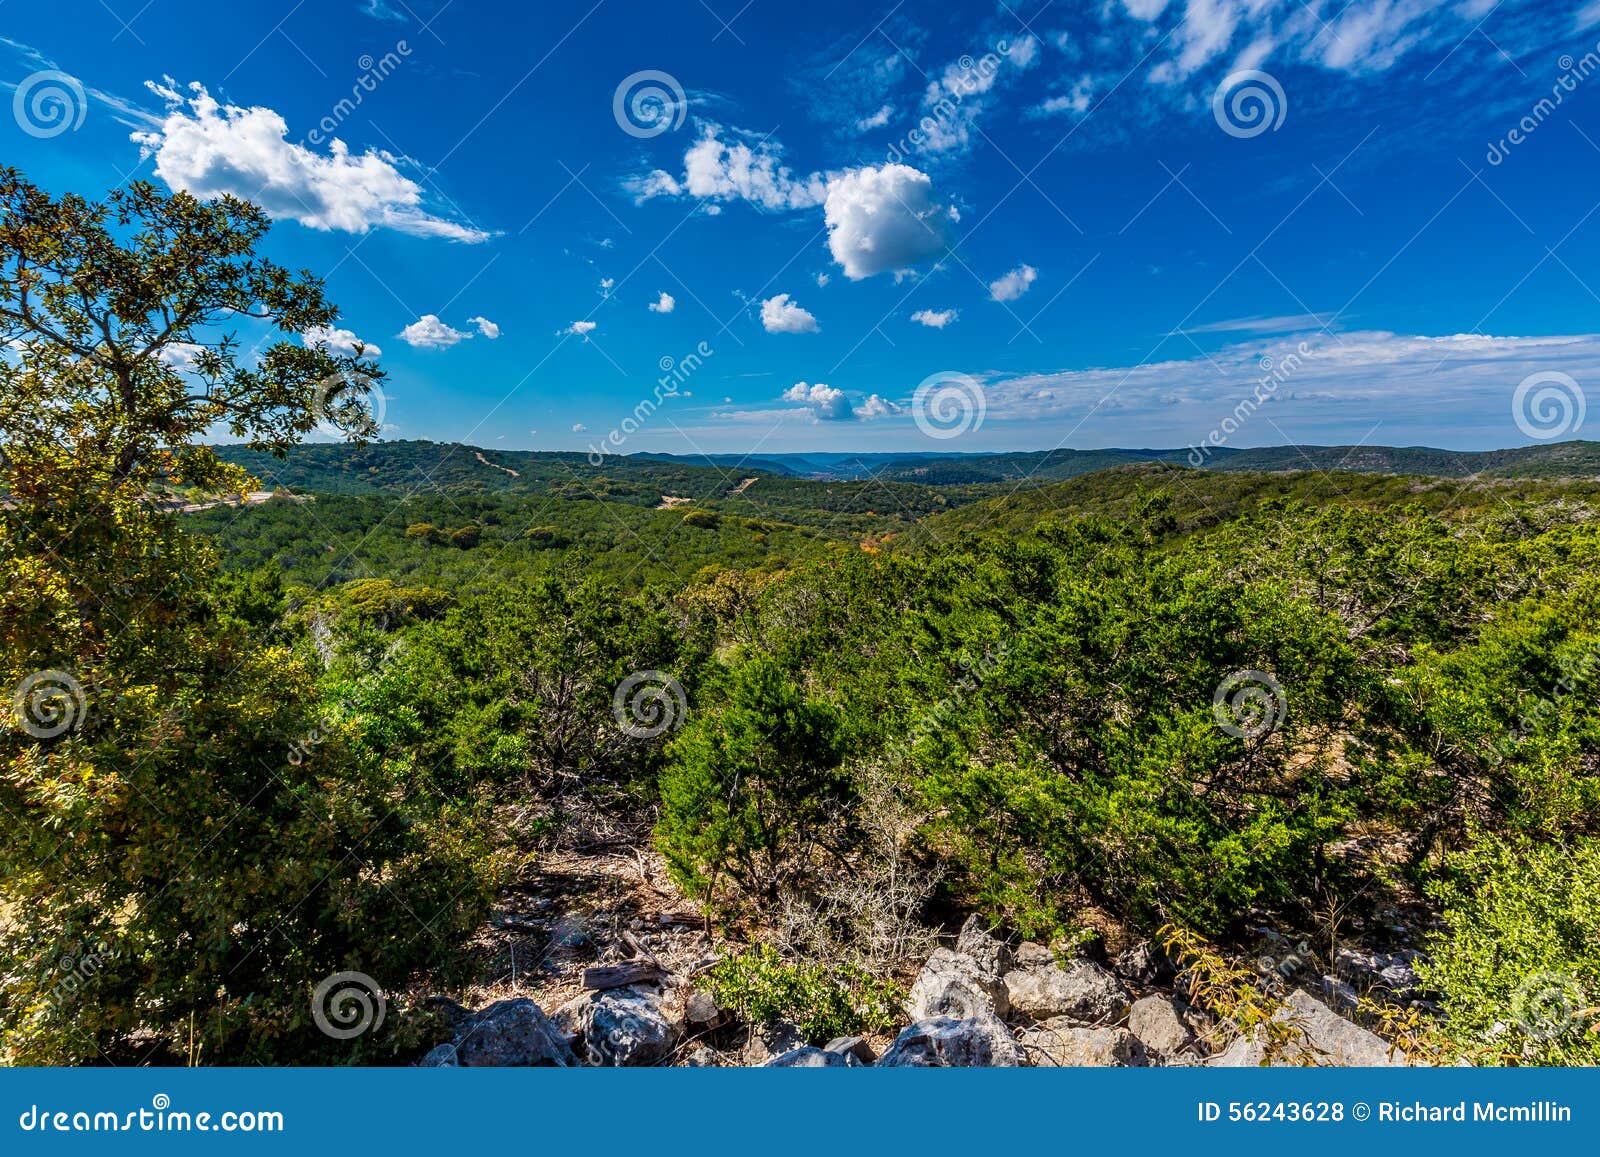 wide angle view of the texas hill country